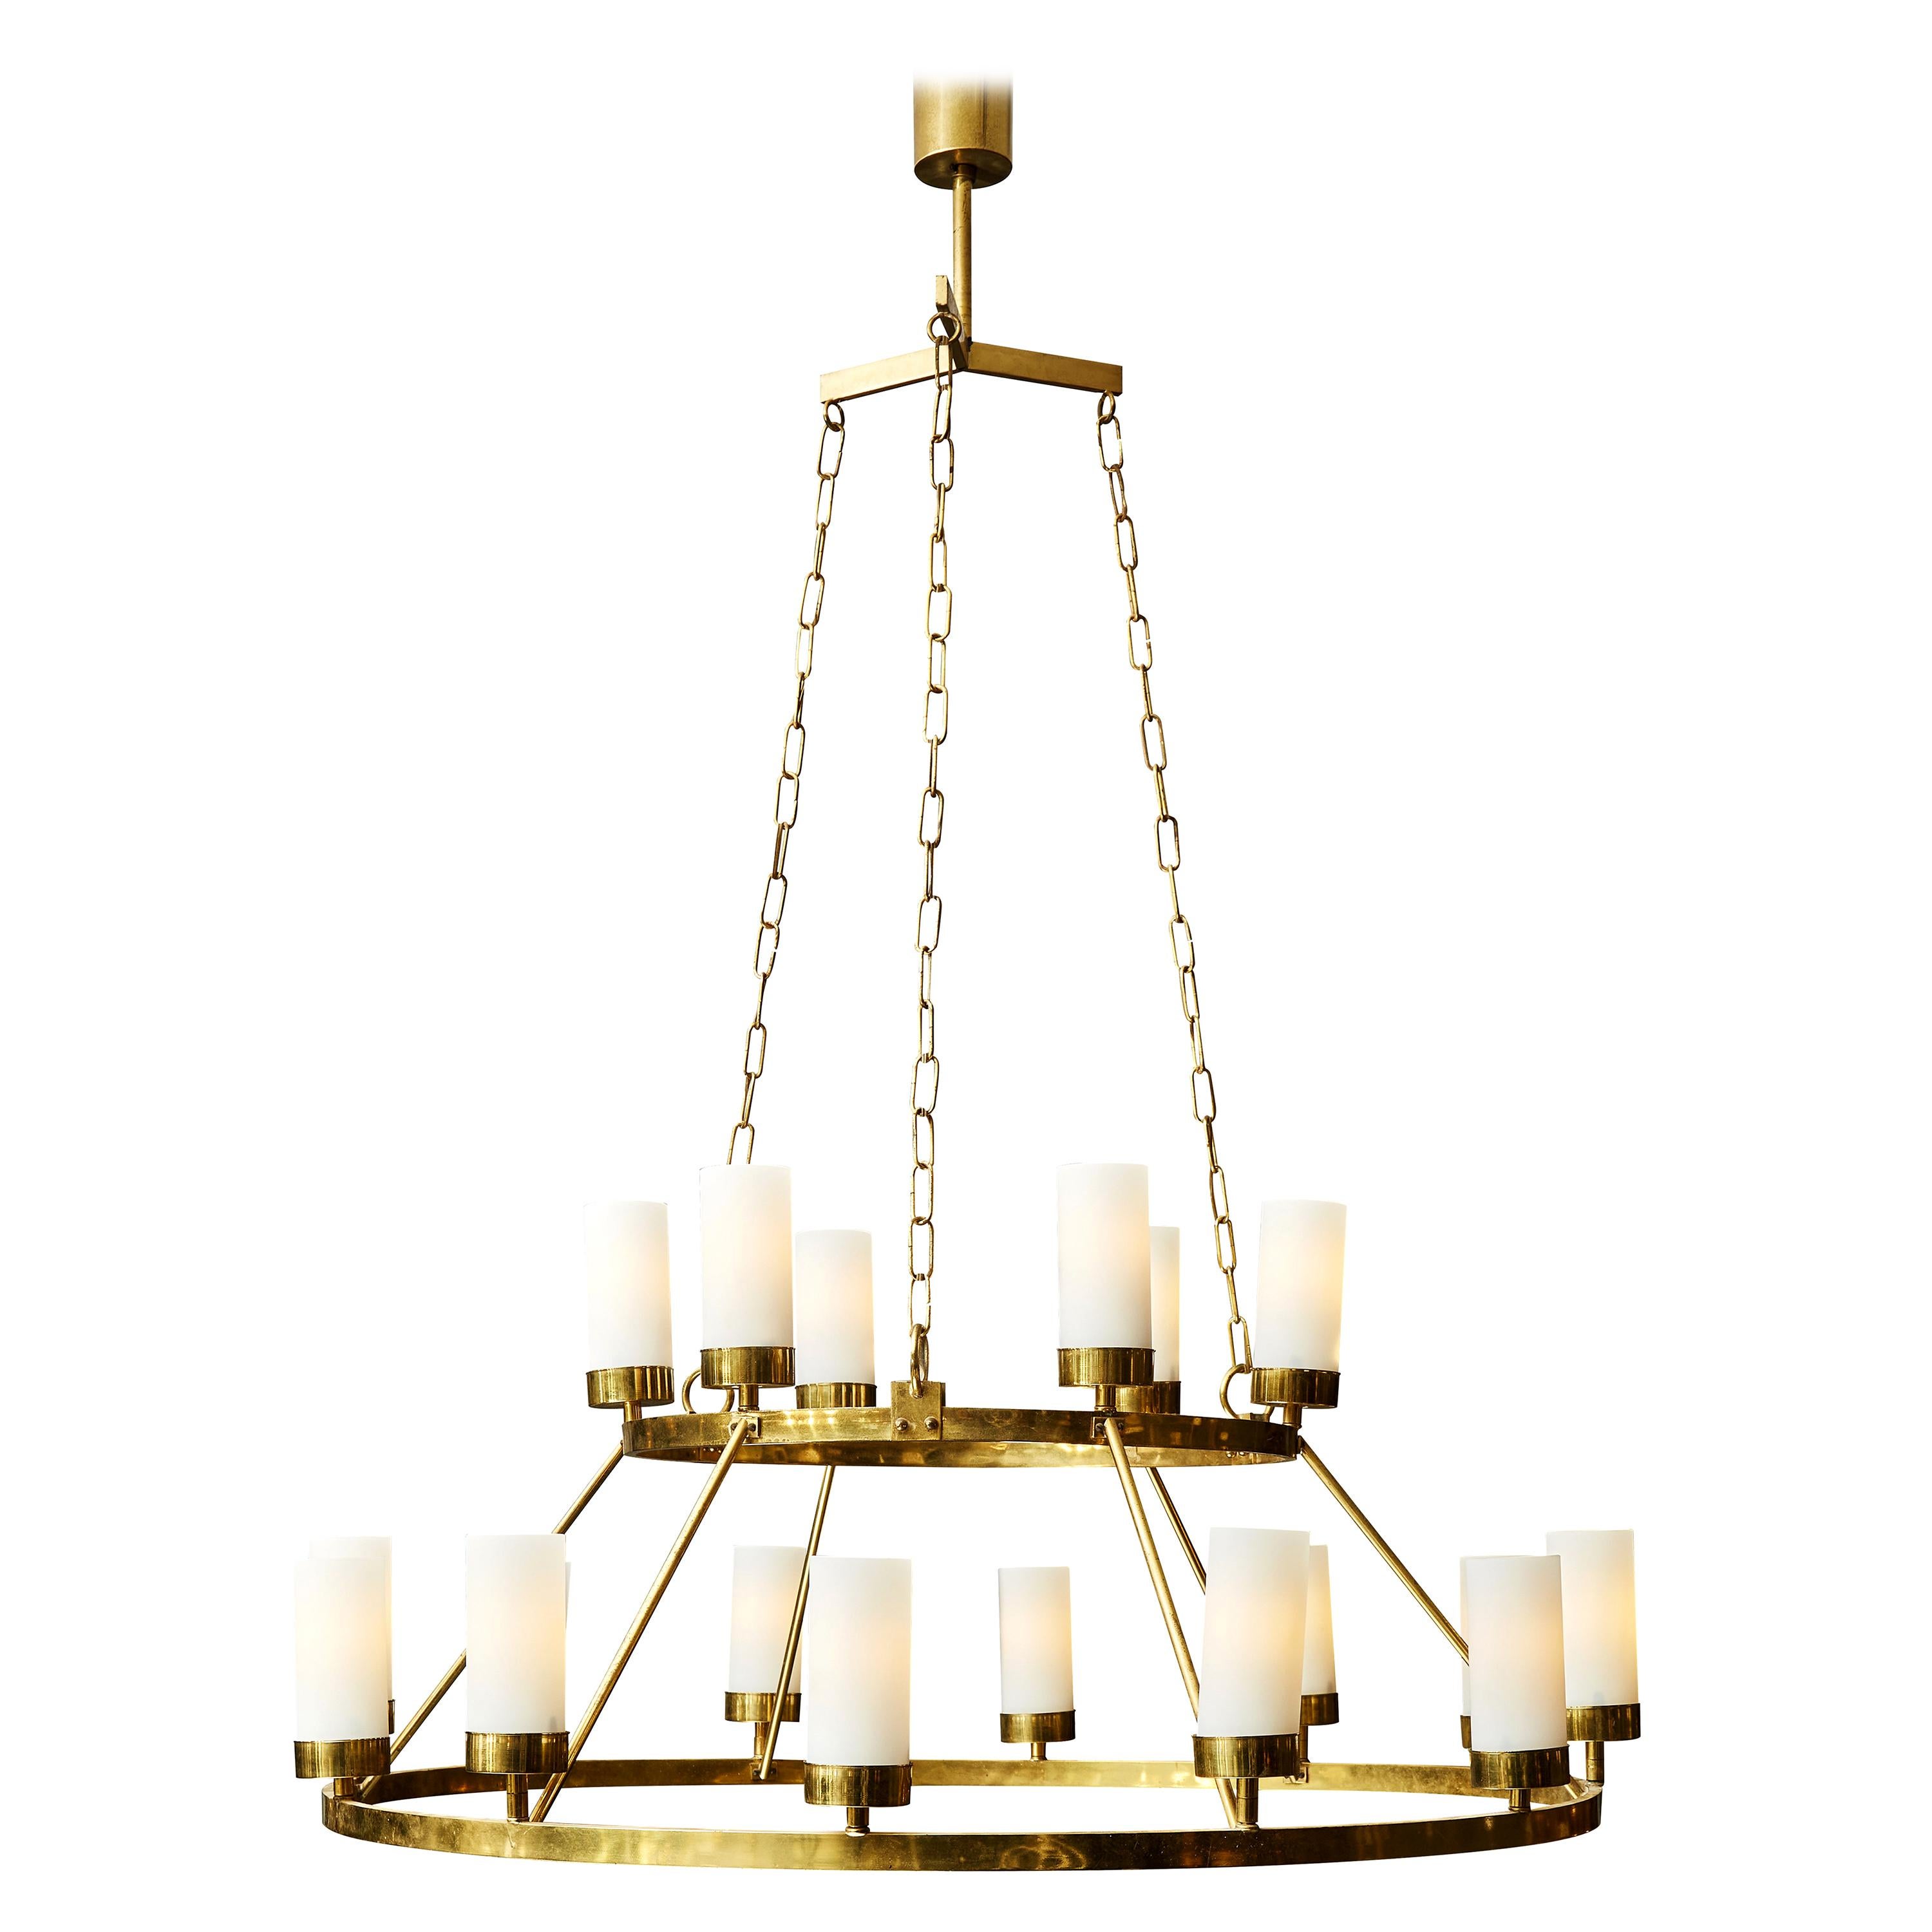 Brass Circular Chandelier with Eighteen Lights Hanged by Chains For Sale